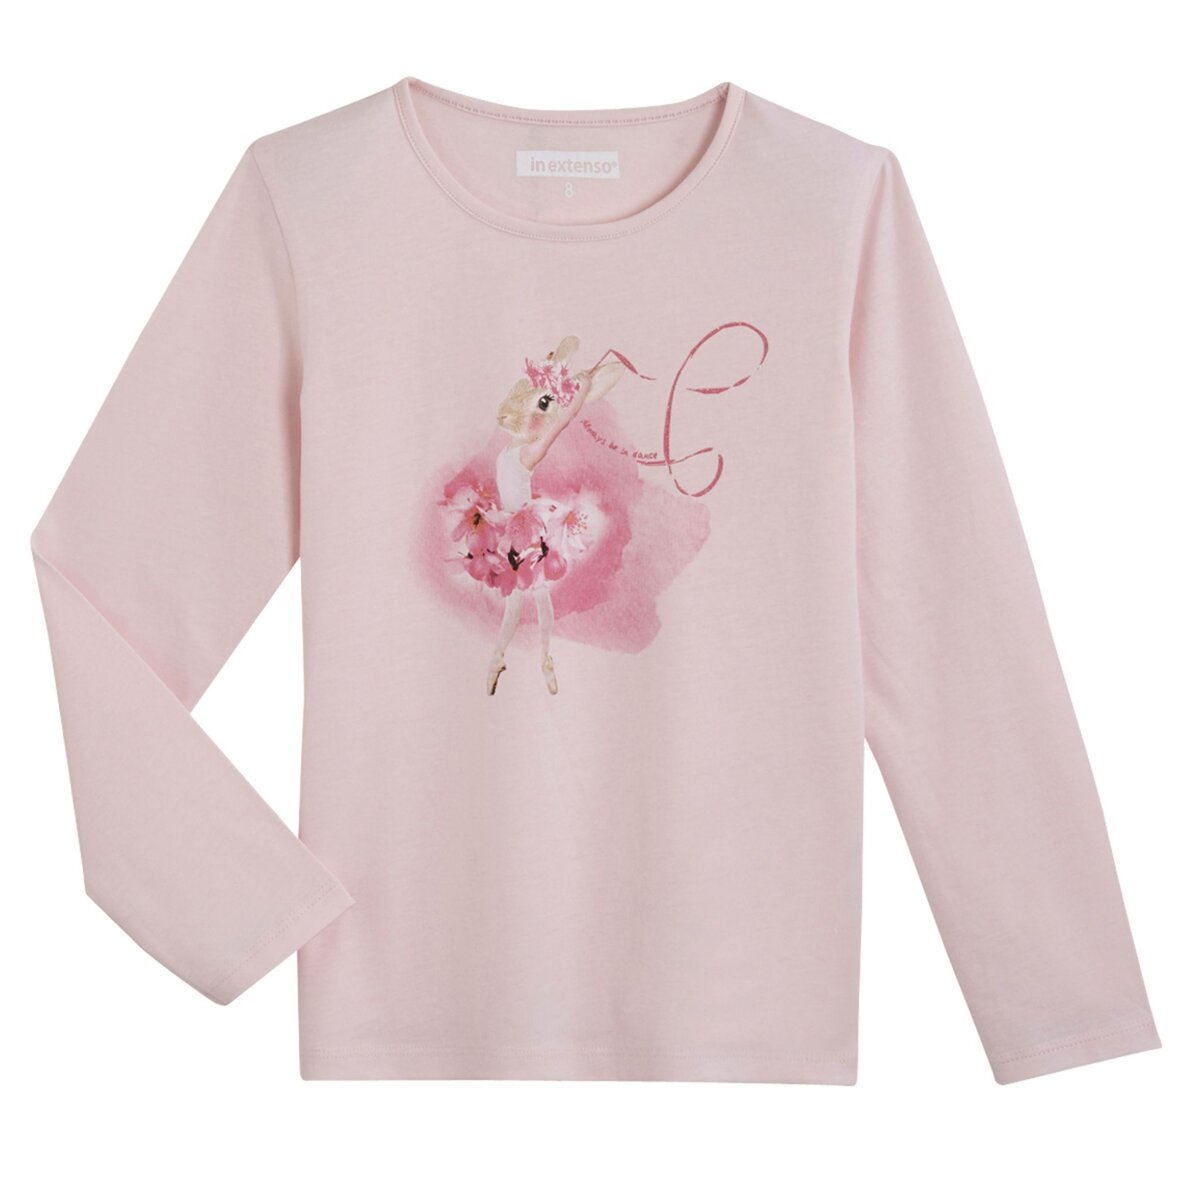 IN EXTENSO Tee-shirt Manches longues imprimé Lapin Fille